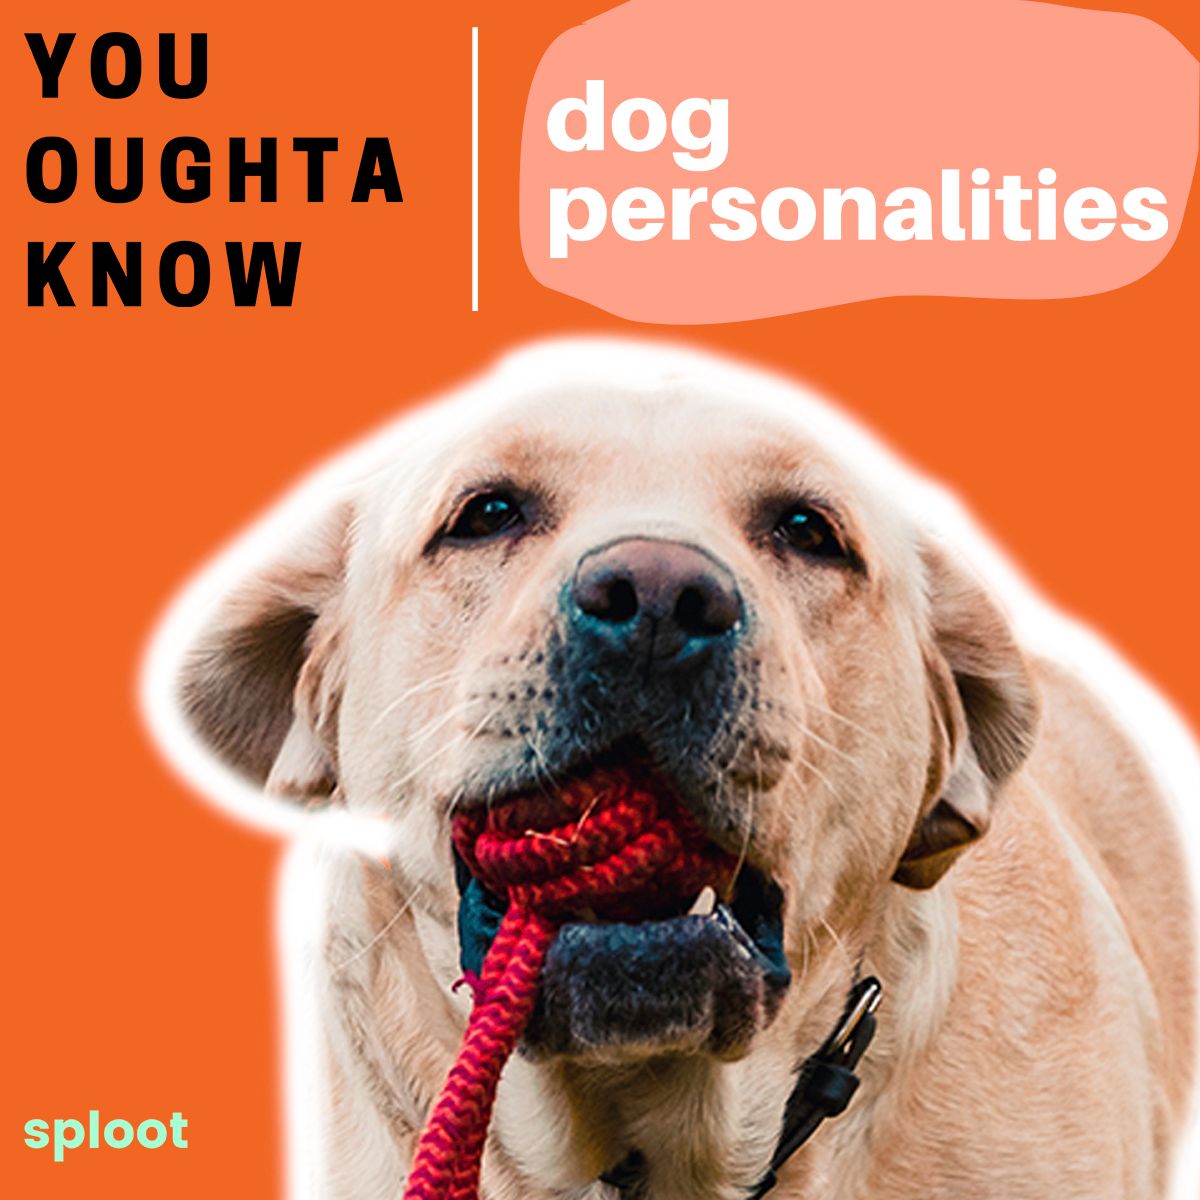 Do Dogs Really Have Unique Personalities?